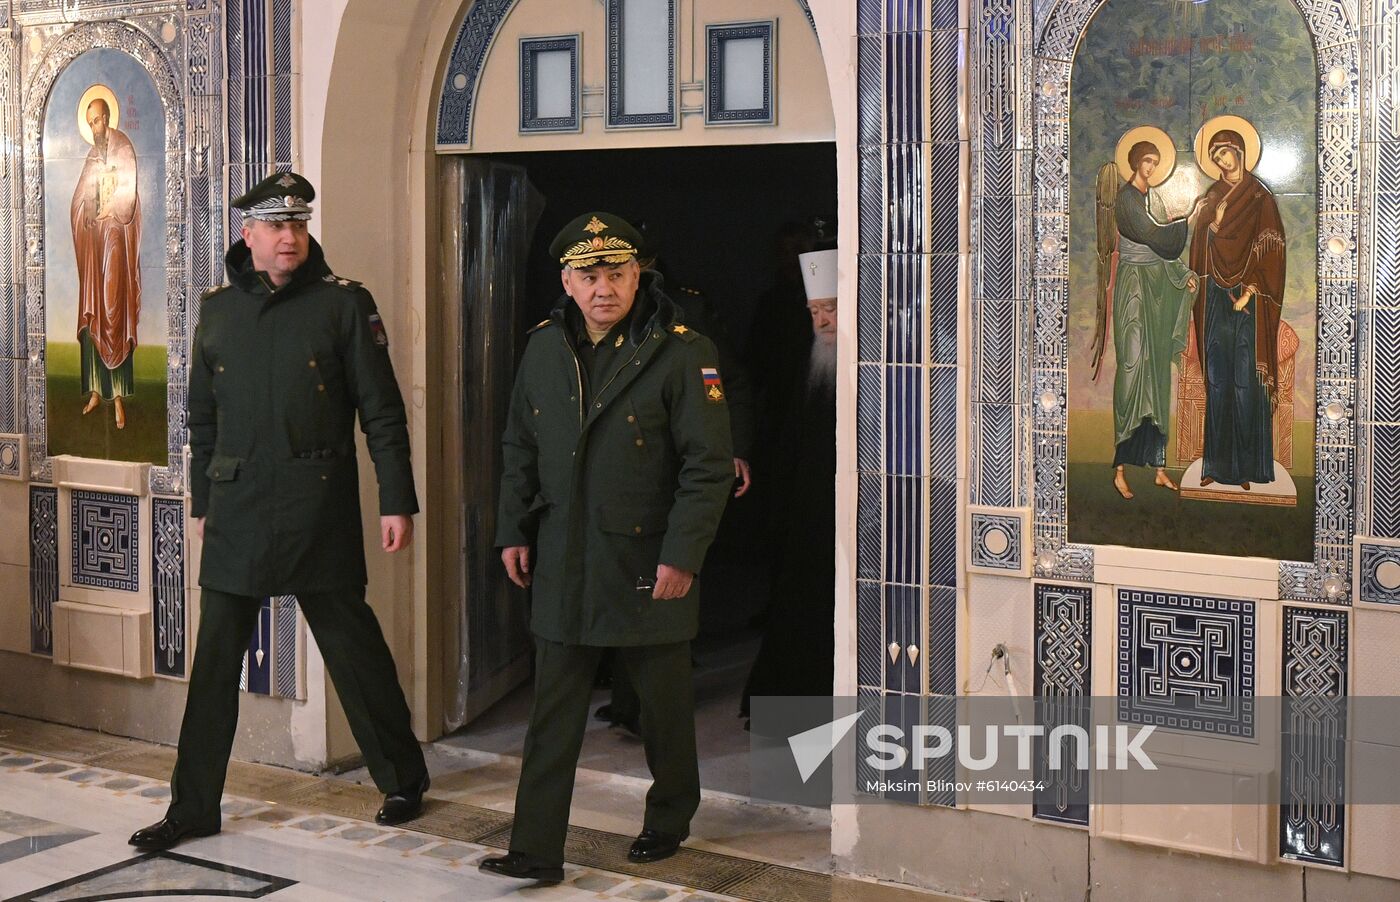 Russia Military Cathedral Shoigu